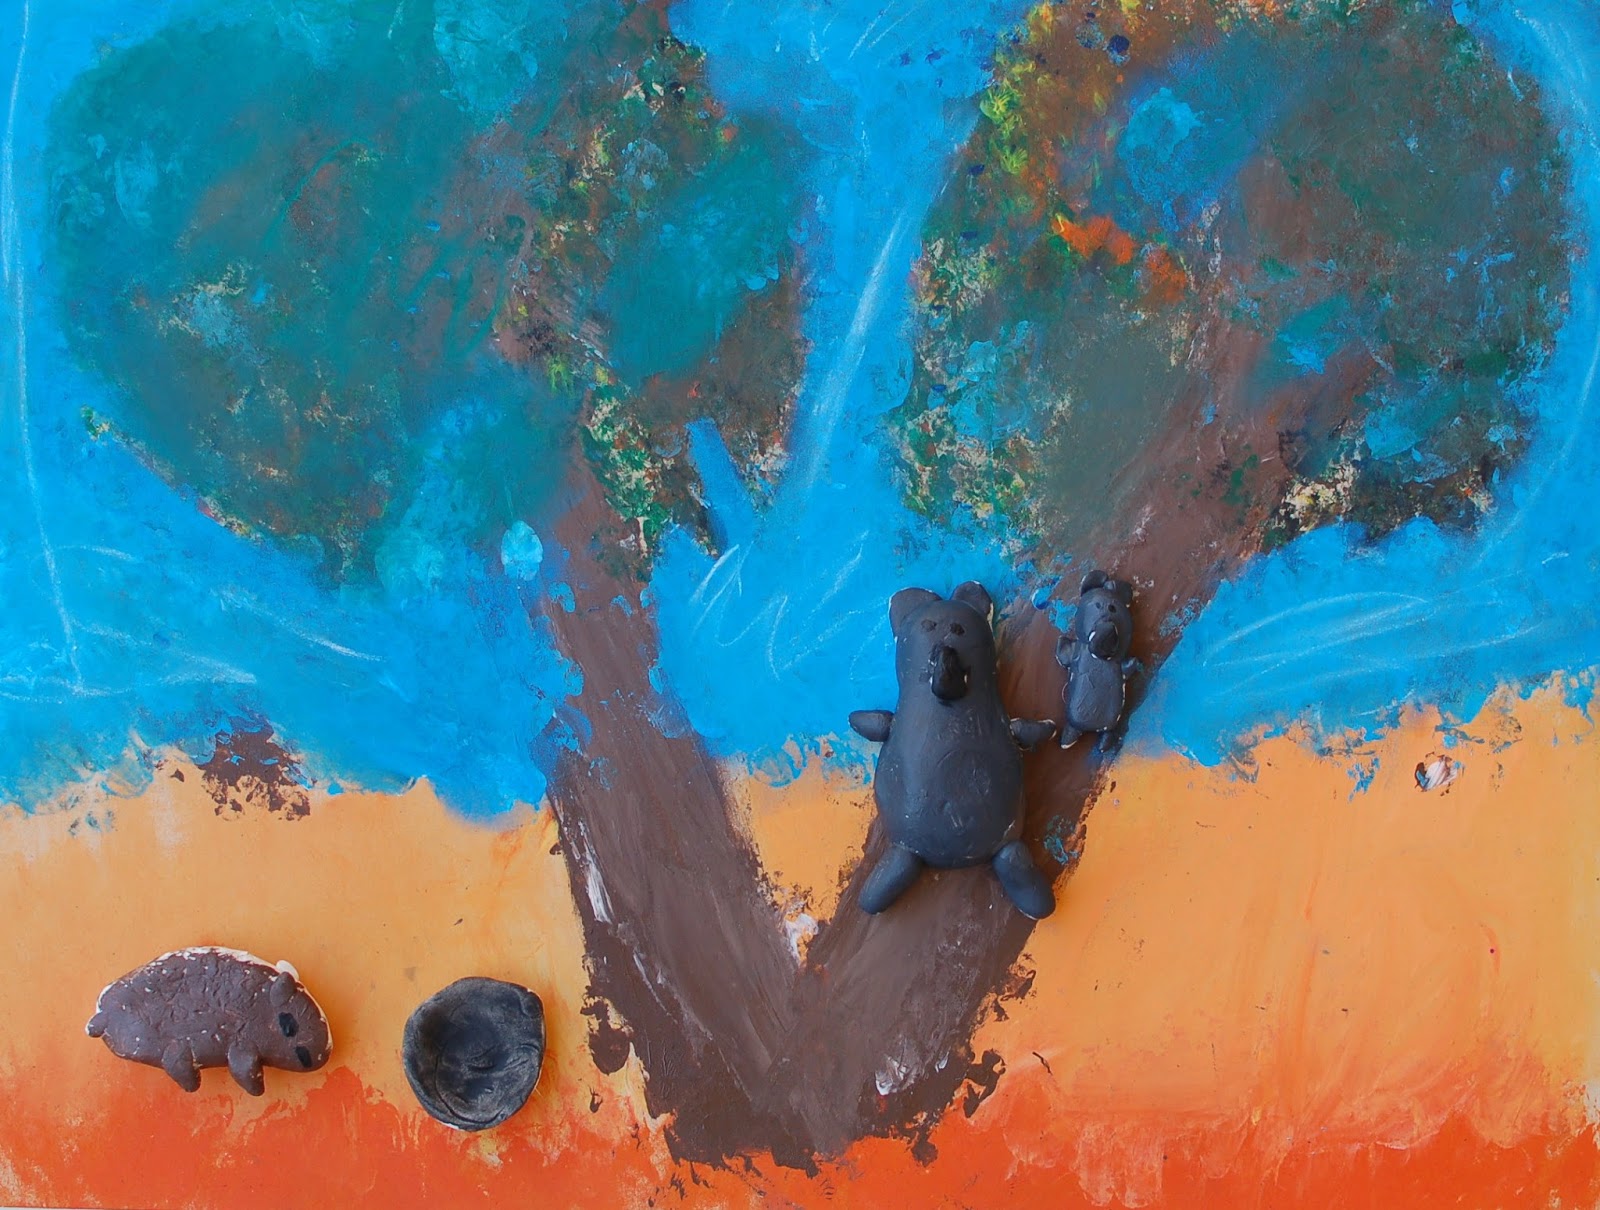 Oil Pastel Abstract Landscape - Things to Make and Do, Crafts and  Activities for Kids - The Crafty Crow